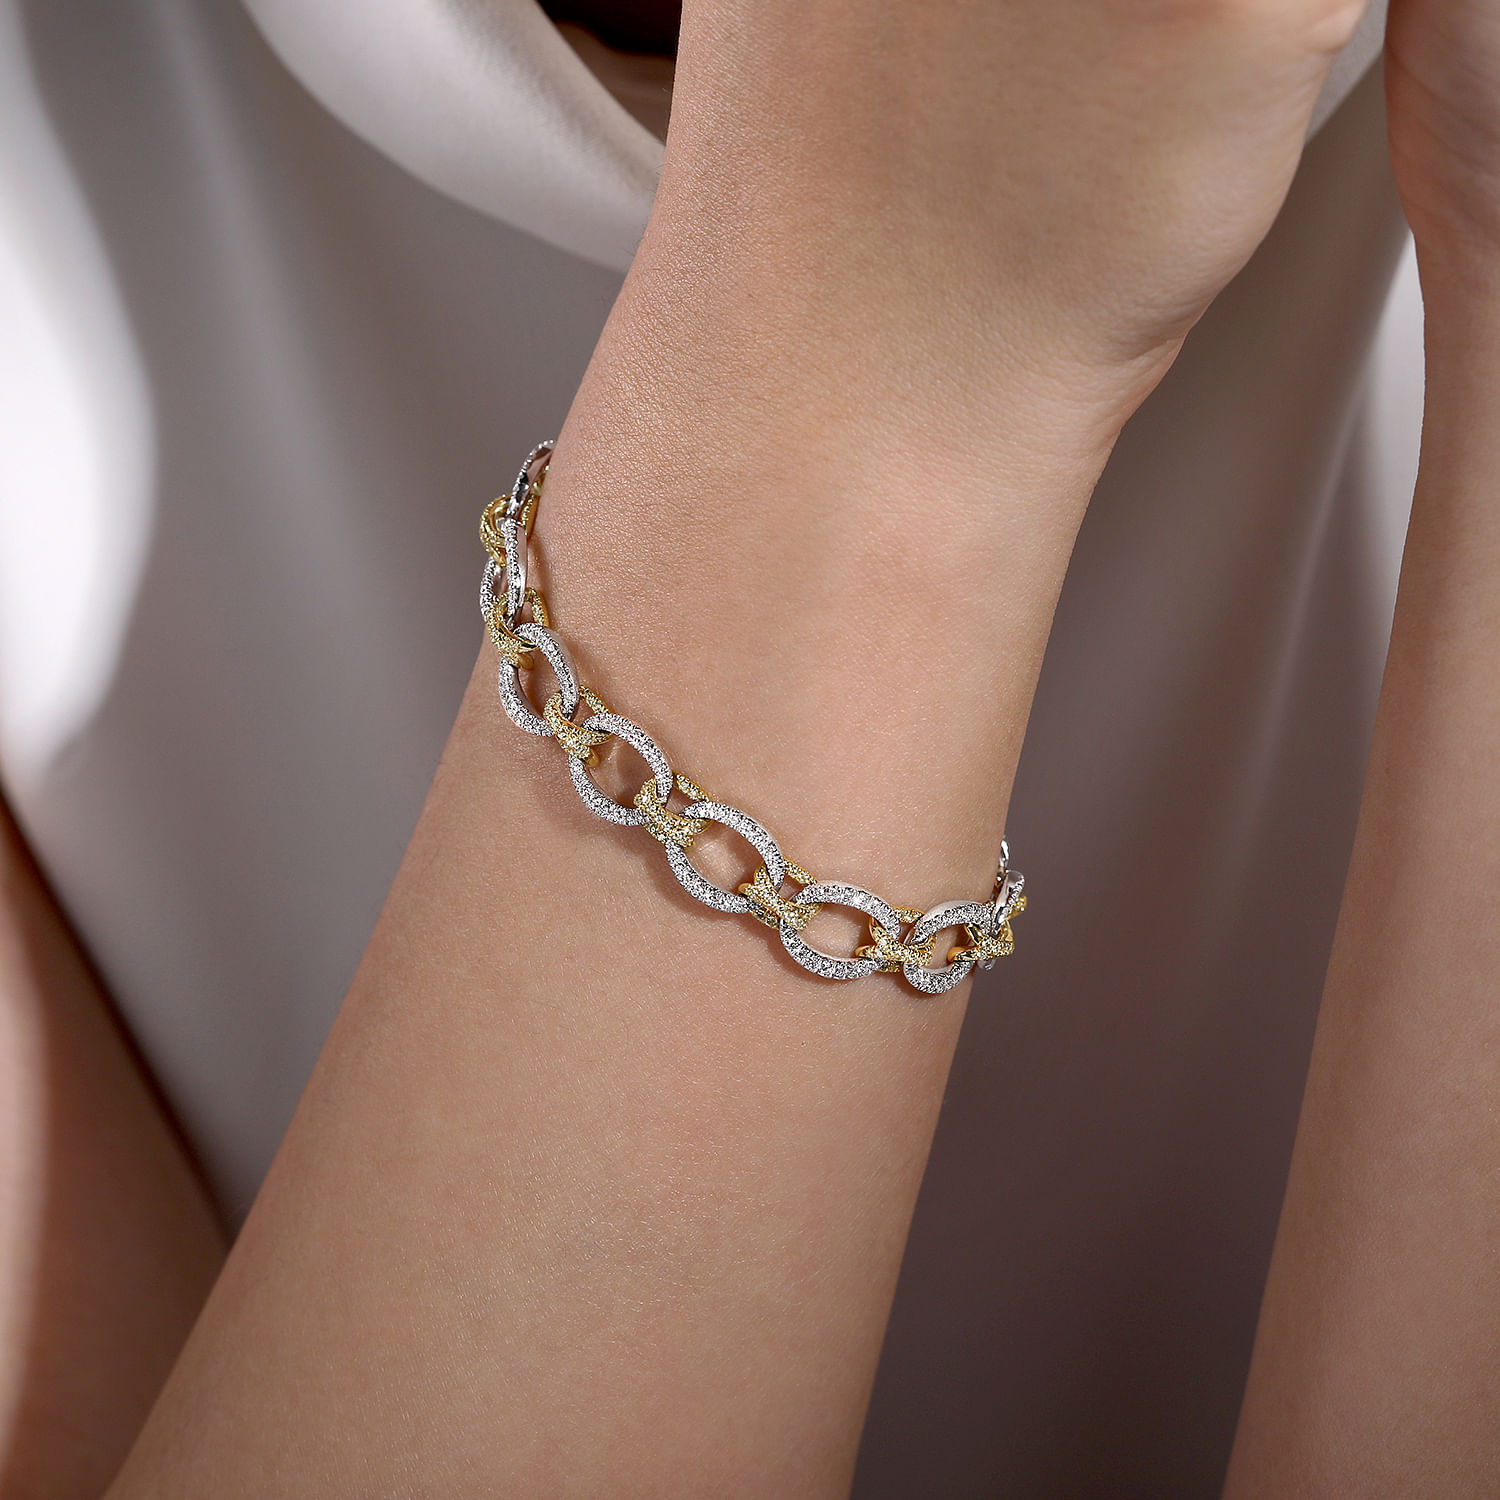 14K Yellow and White Gold Bracelet with Alternating Links and Pavé Diamonds